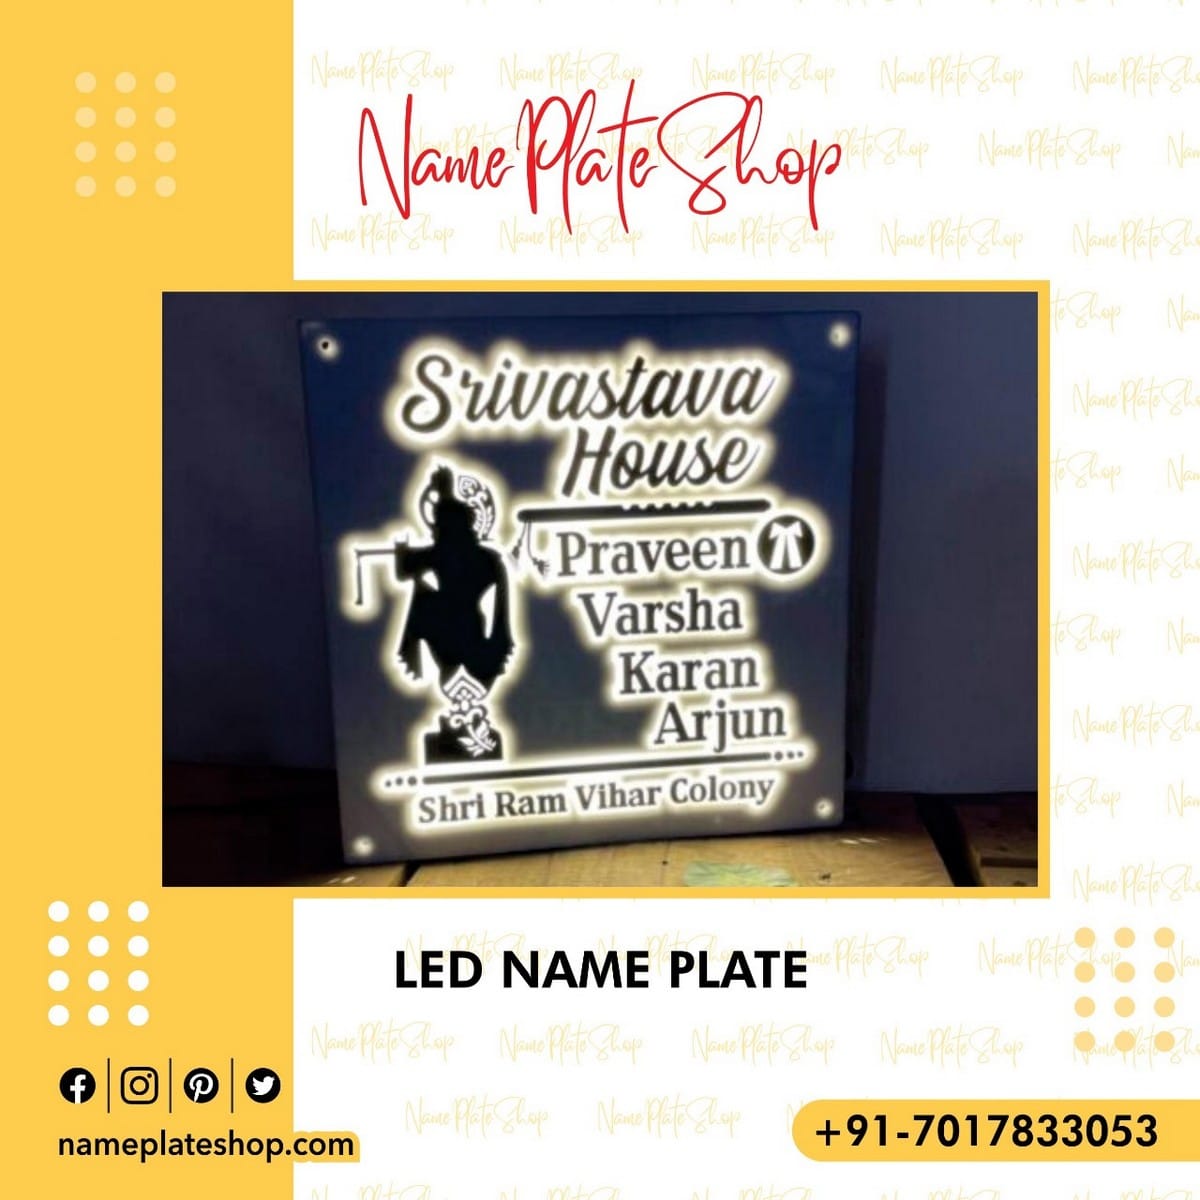 Led Name Plates The New Trend Of Name Plates On Nameplateshop